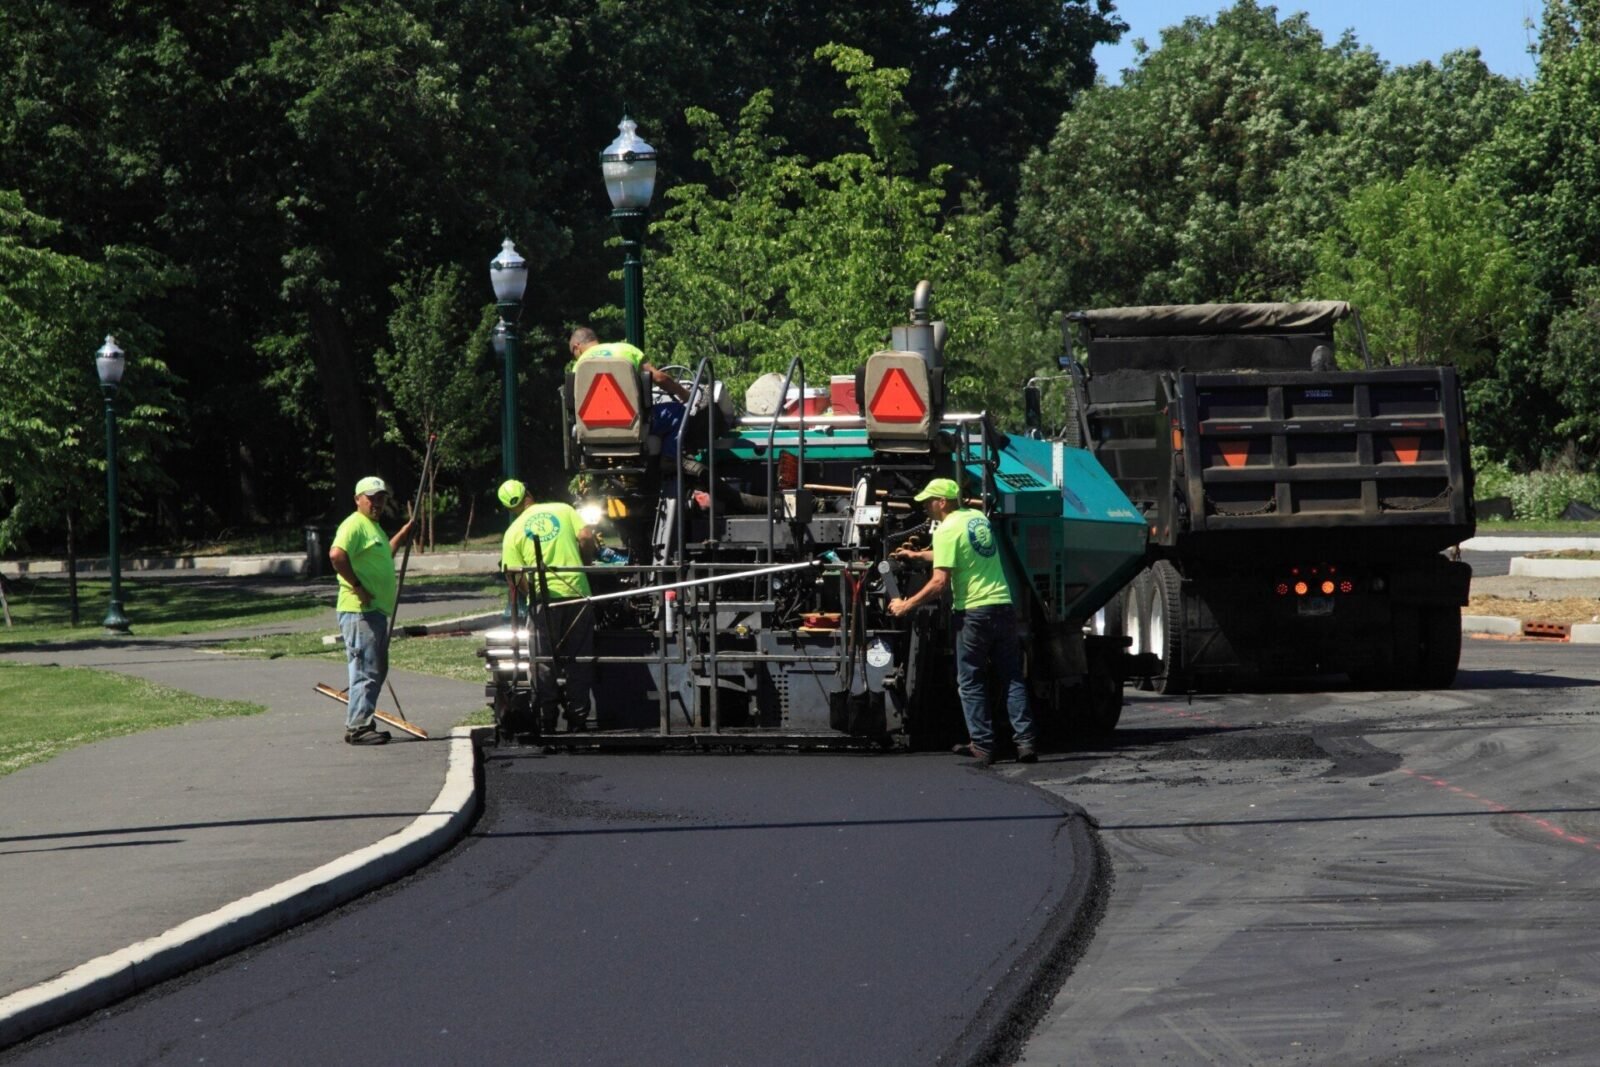 A crew of workers in bright green shirts and helmets is operating machinery for asphalt paving on a road in Riviera Beach. A large dump truck from Palm Beach Asphalt is unloading asphalt as workers use tools to smooth and pave the surface. Trees and street lamps are visible in the background.